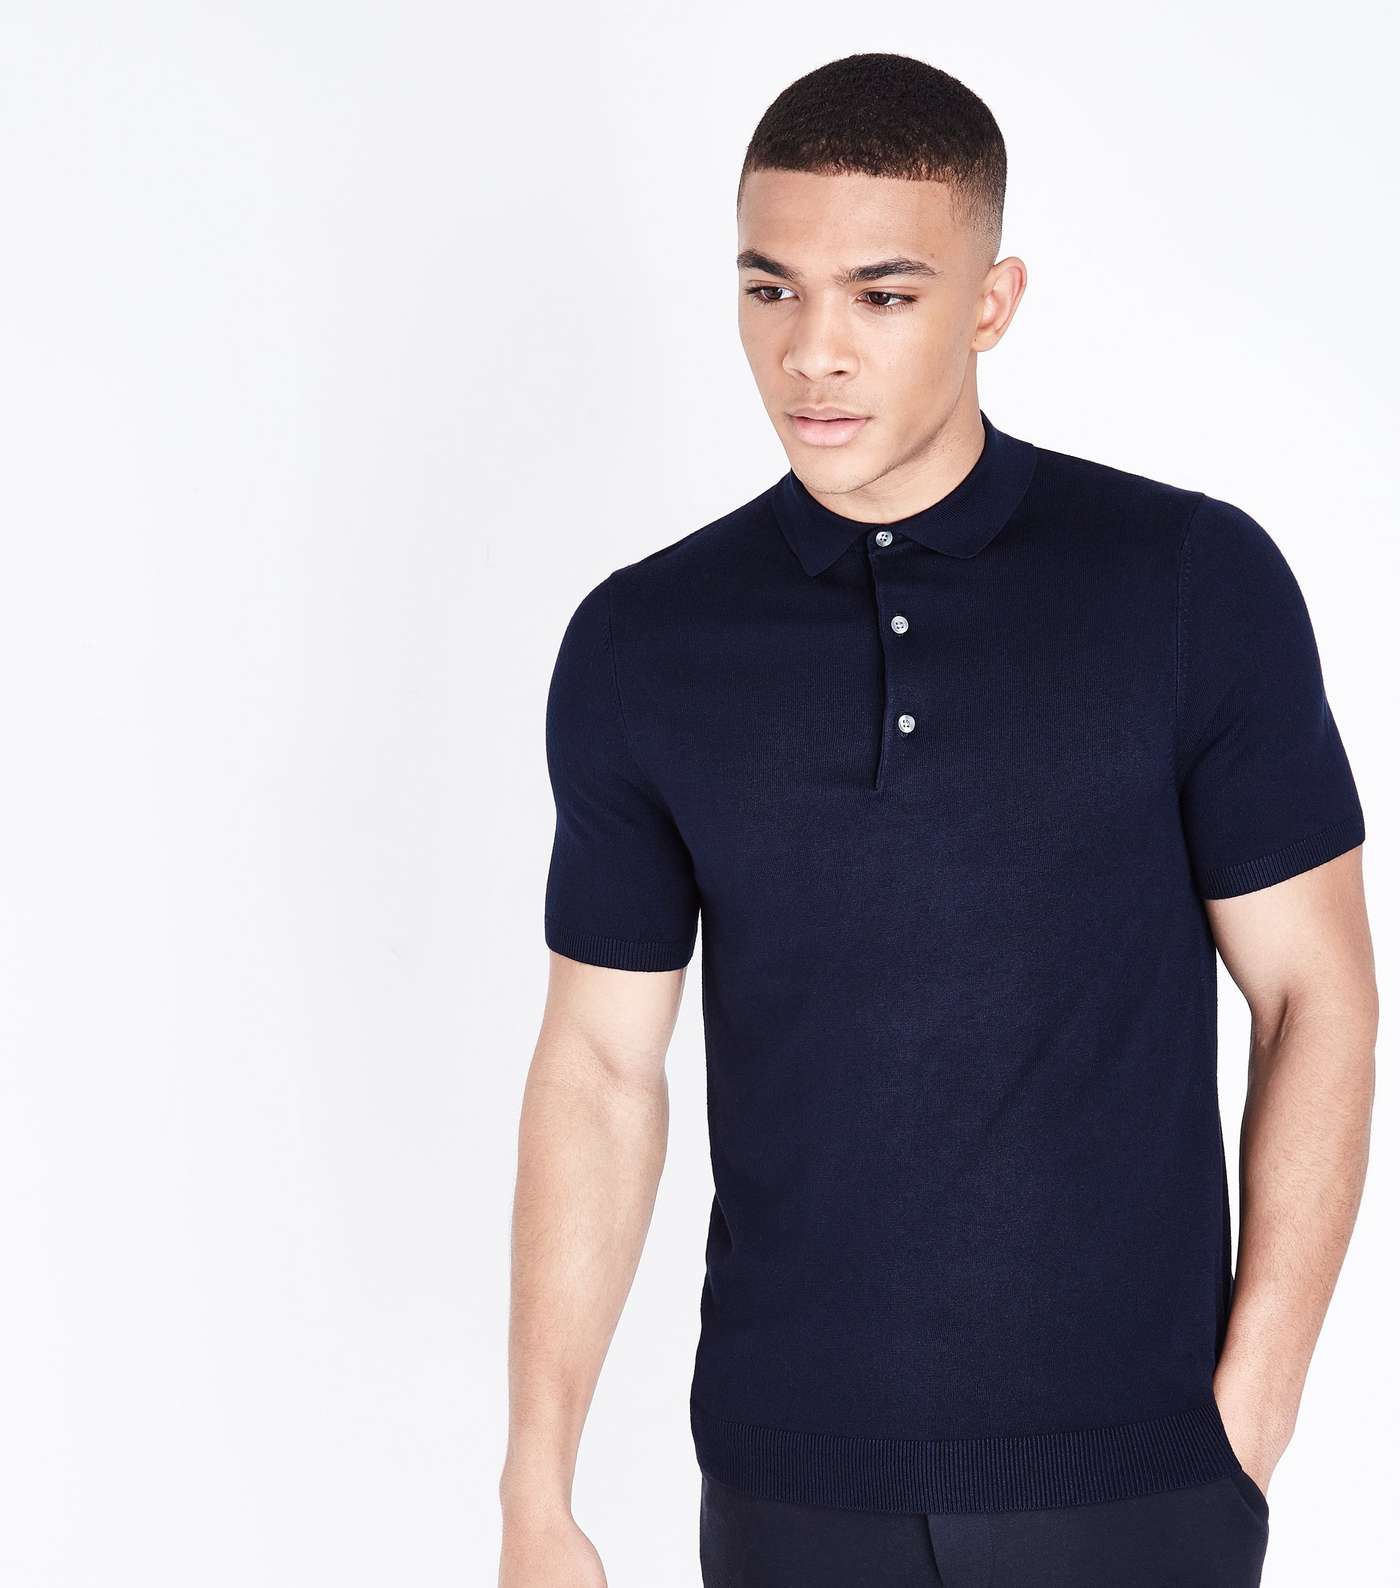 Navy Knit Muscle Fit Polo Shirt